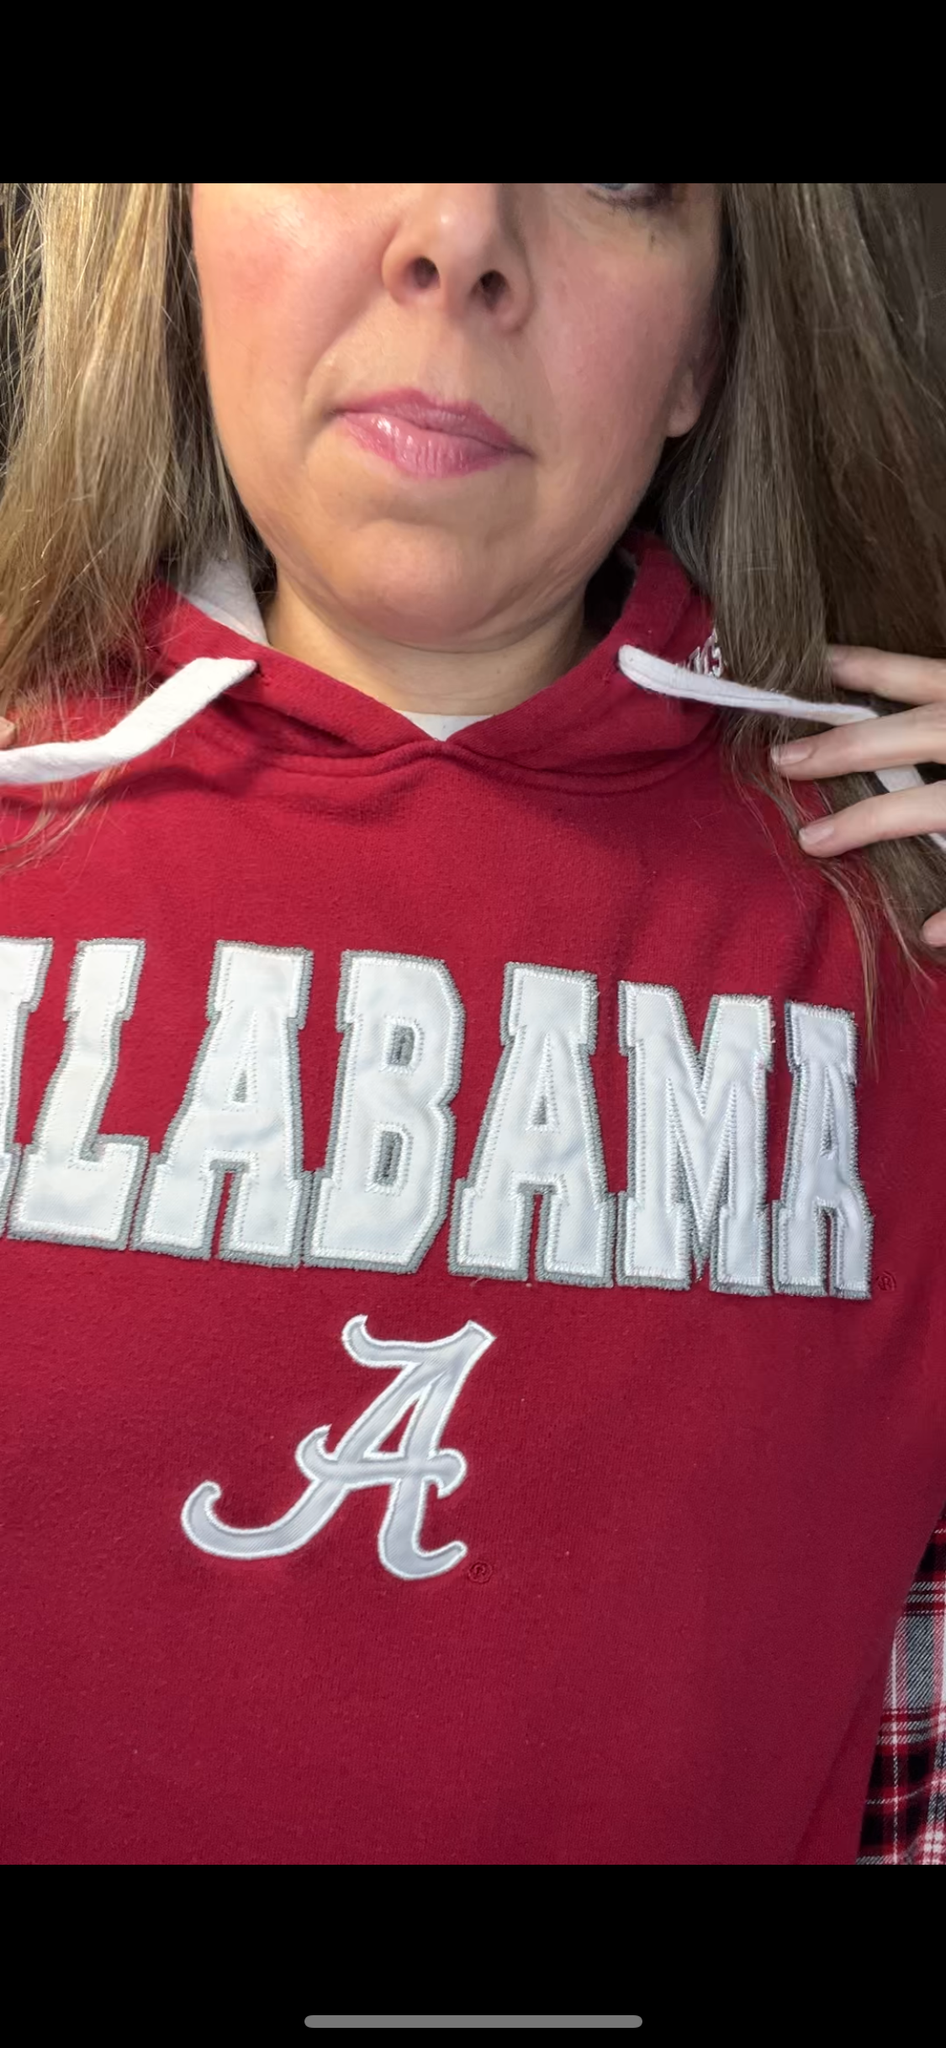 Upcycled Alabama - Woman’s XL – midweight sweatshirt with flannel sleeves￼